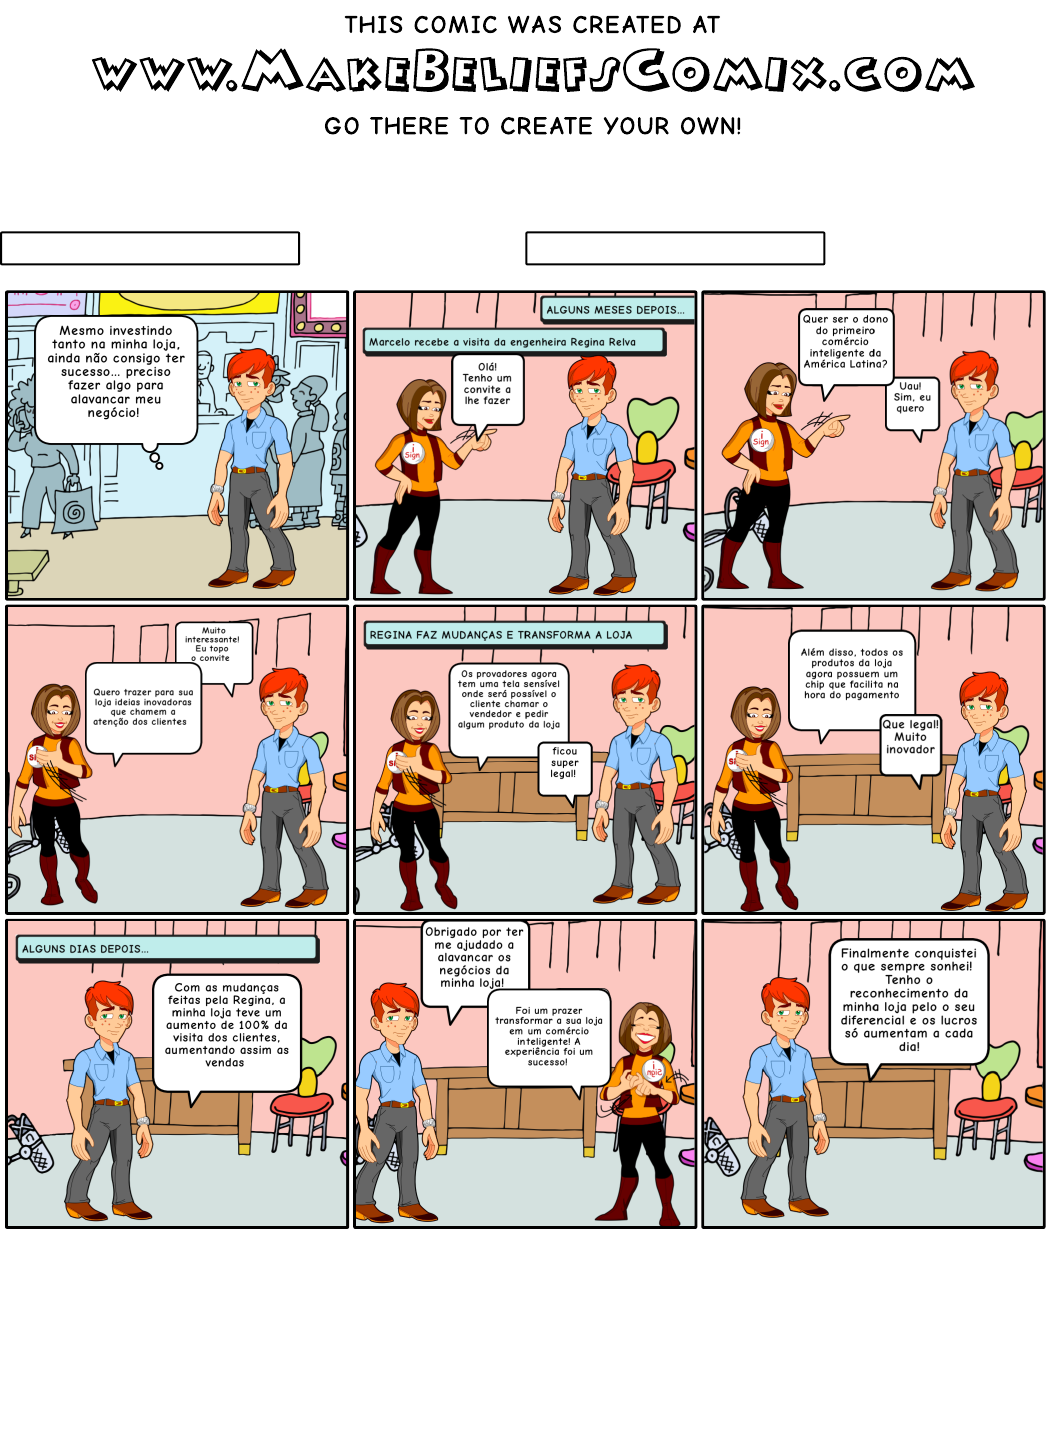 Blinking a Book - Create Your Own Comic Strips Online with MakeBeliefsComix